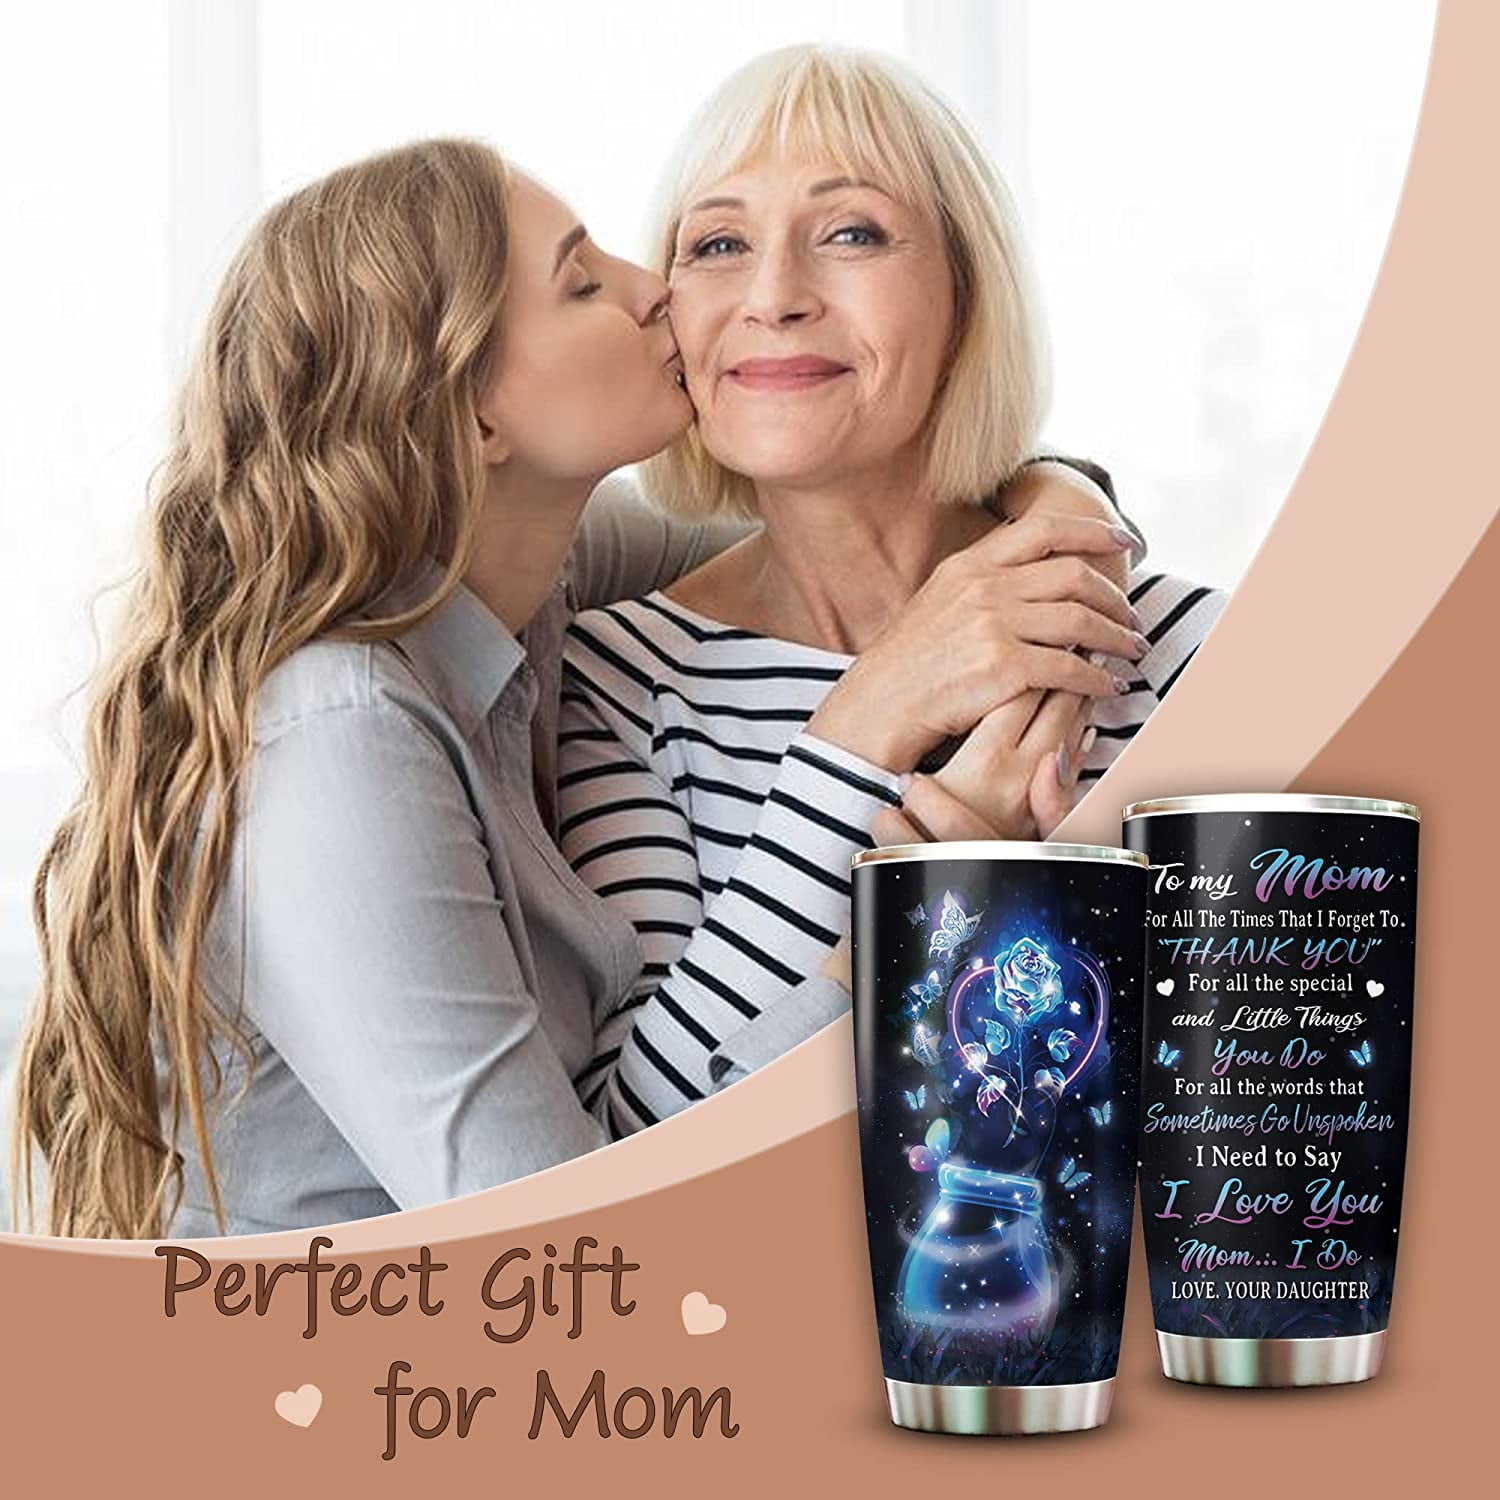 Onebttl Boy Mom Gifts for Women on Mothers' Day, Birthday, Christmas - Boy Mom Tumbler from Son Up to Son Down - for Mom of Boys from Friends